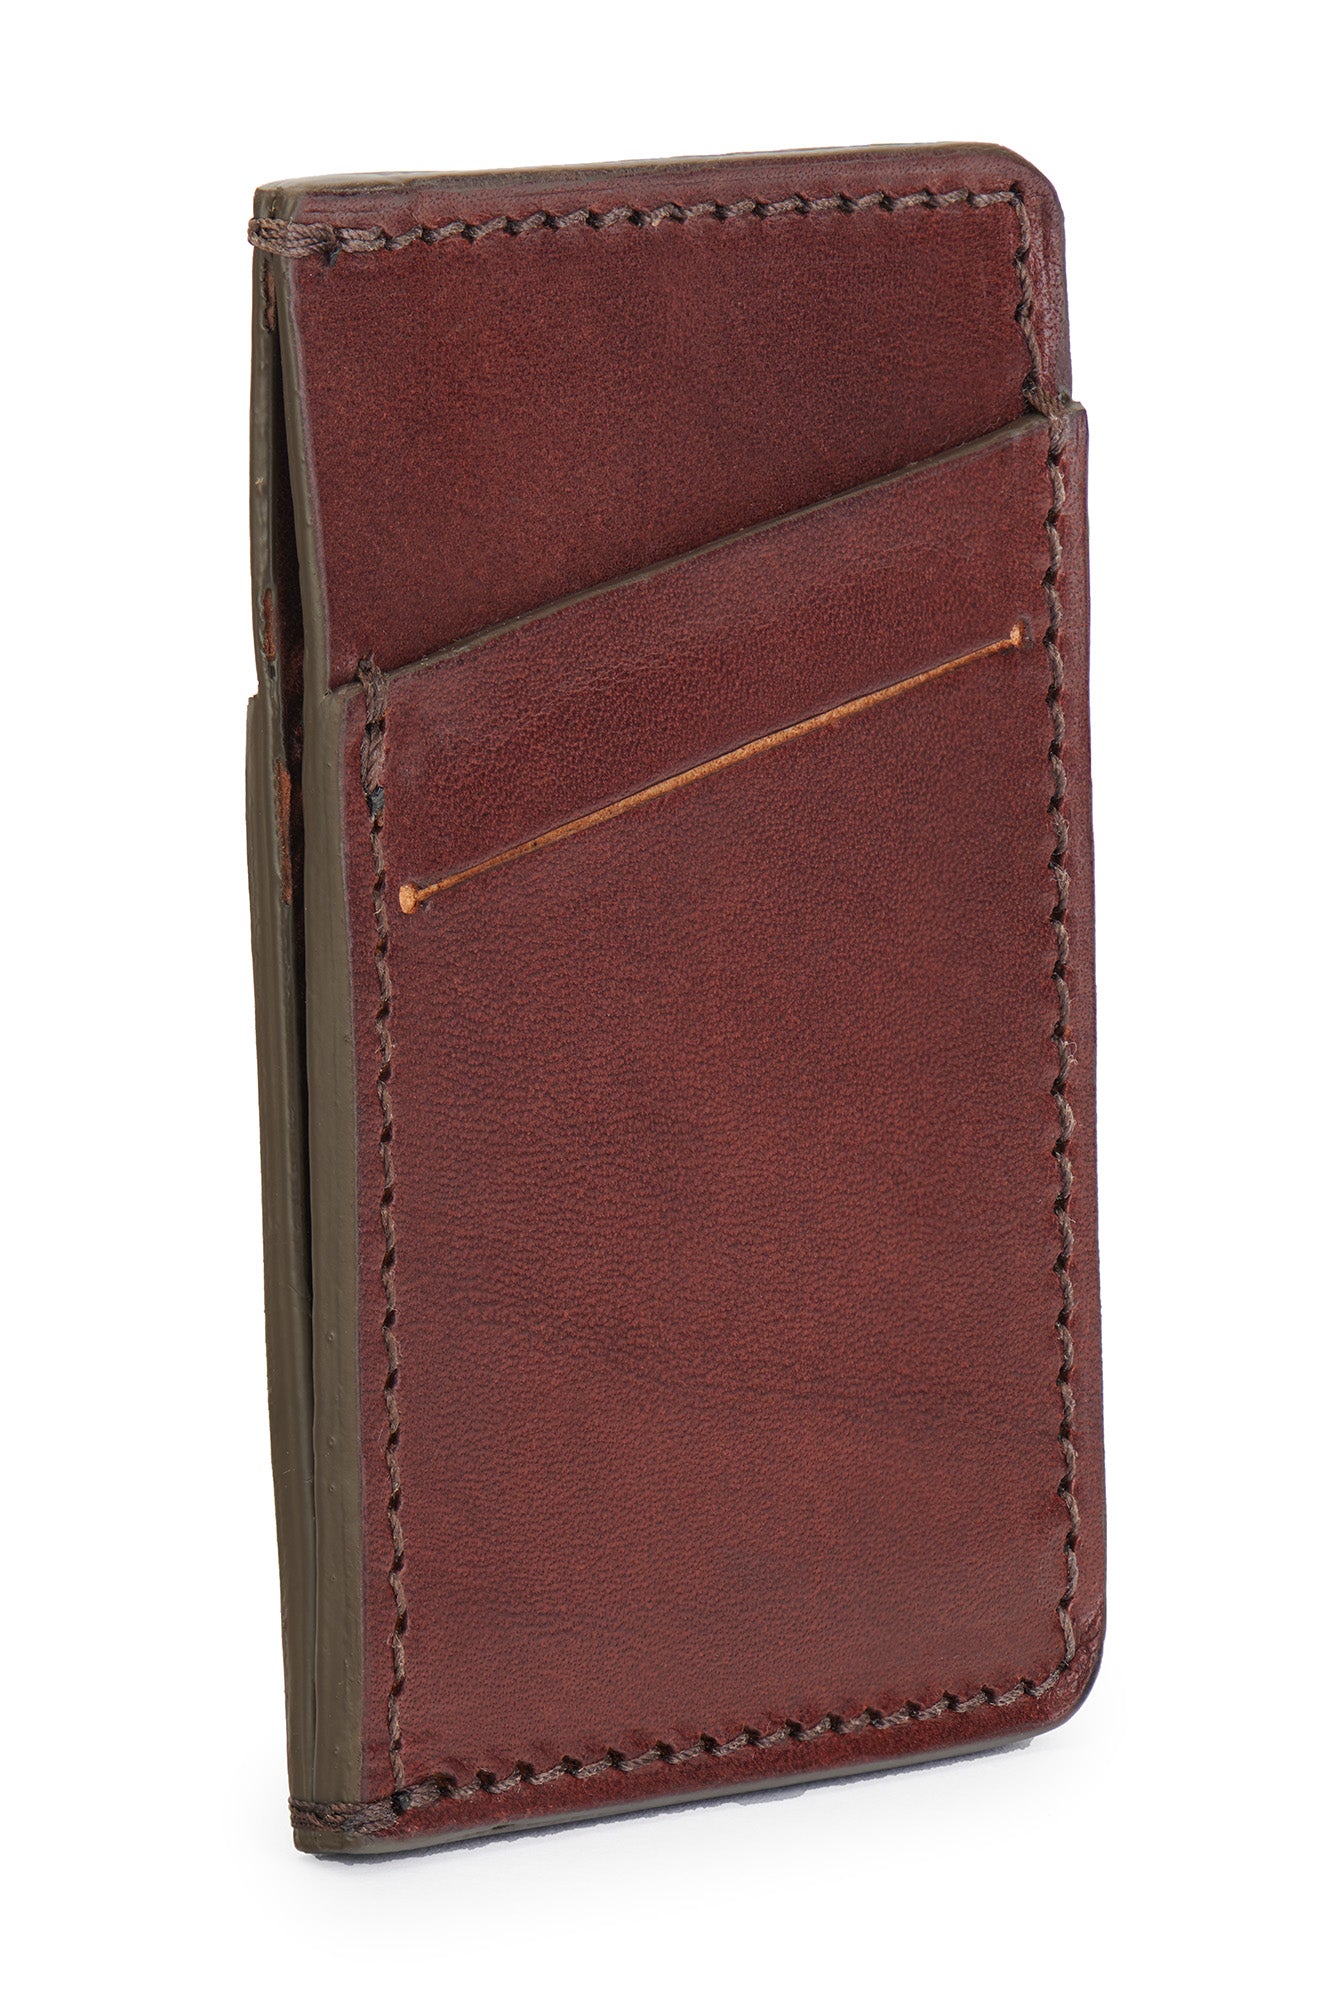 vegetable tanned bridle leather minimalist wallet angle empty pictured in vintage brown